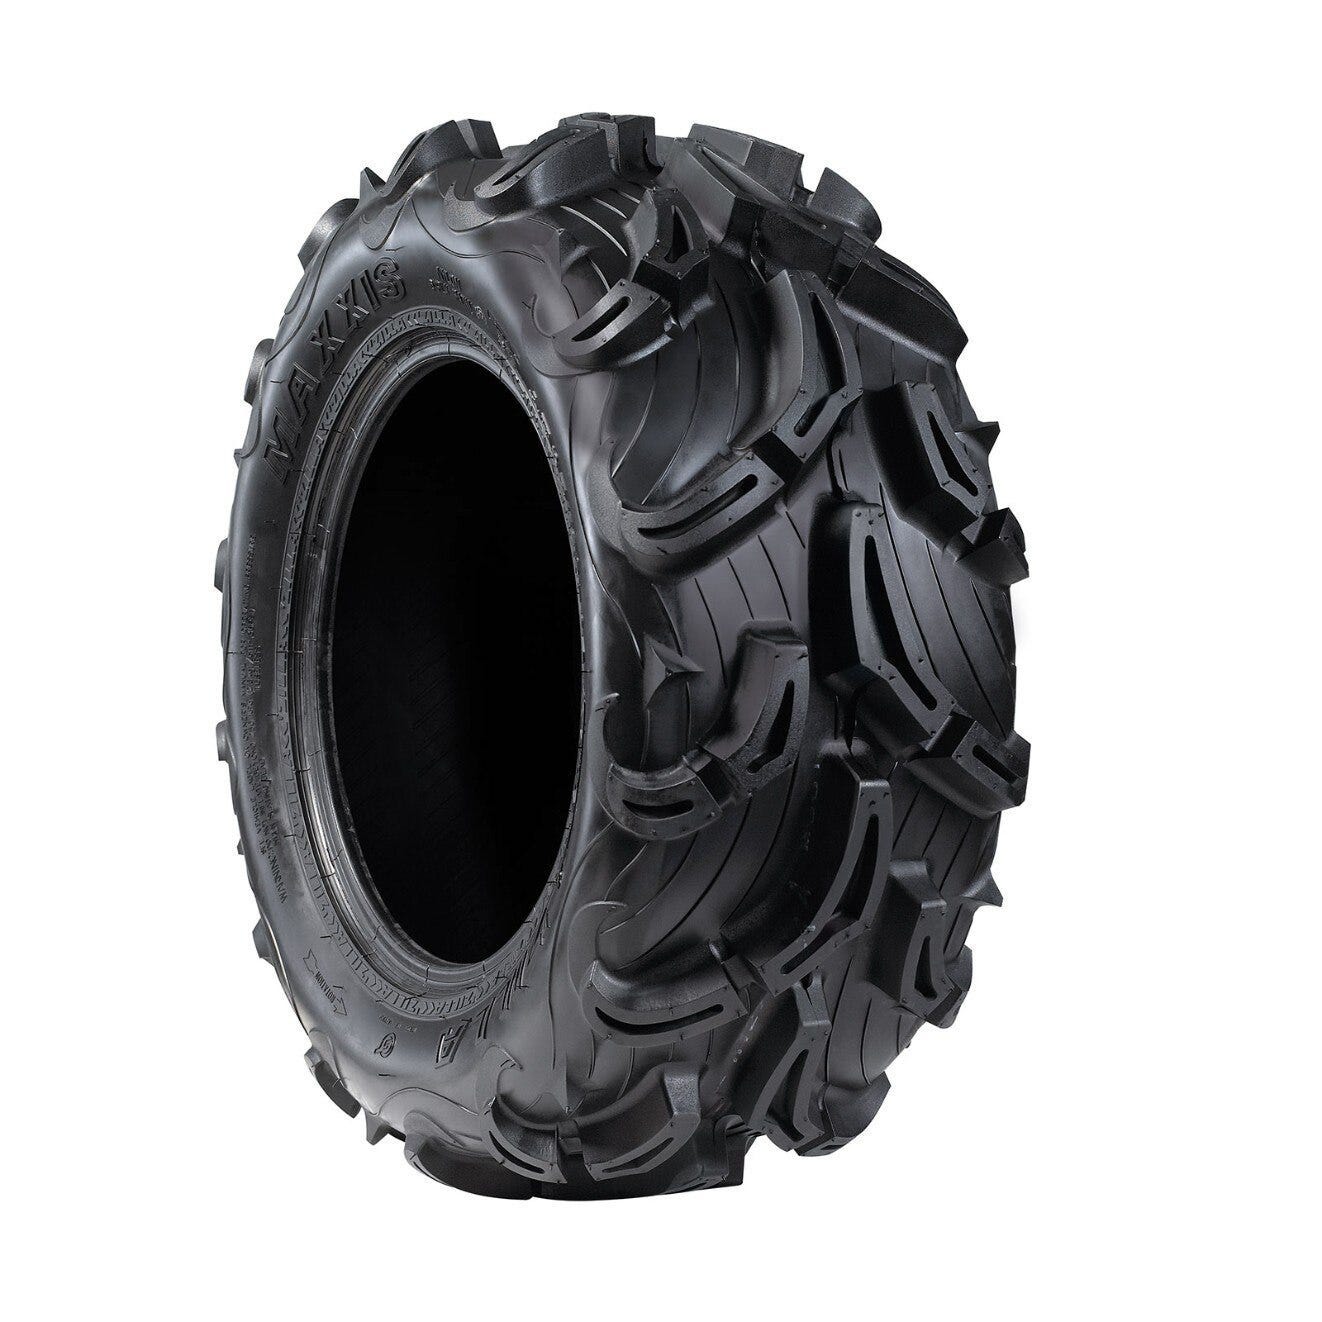 Zilla Tire By Maxxis - Rear - Factory Recreation